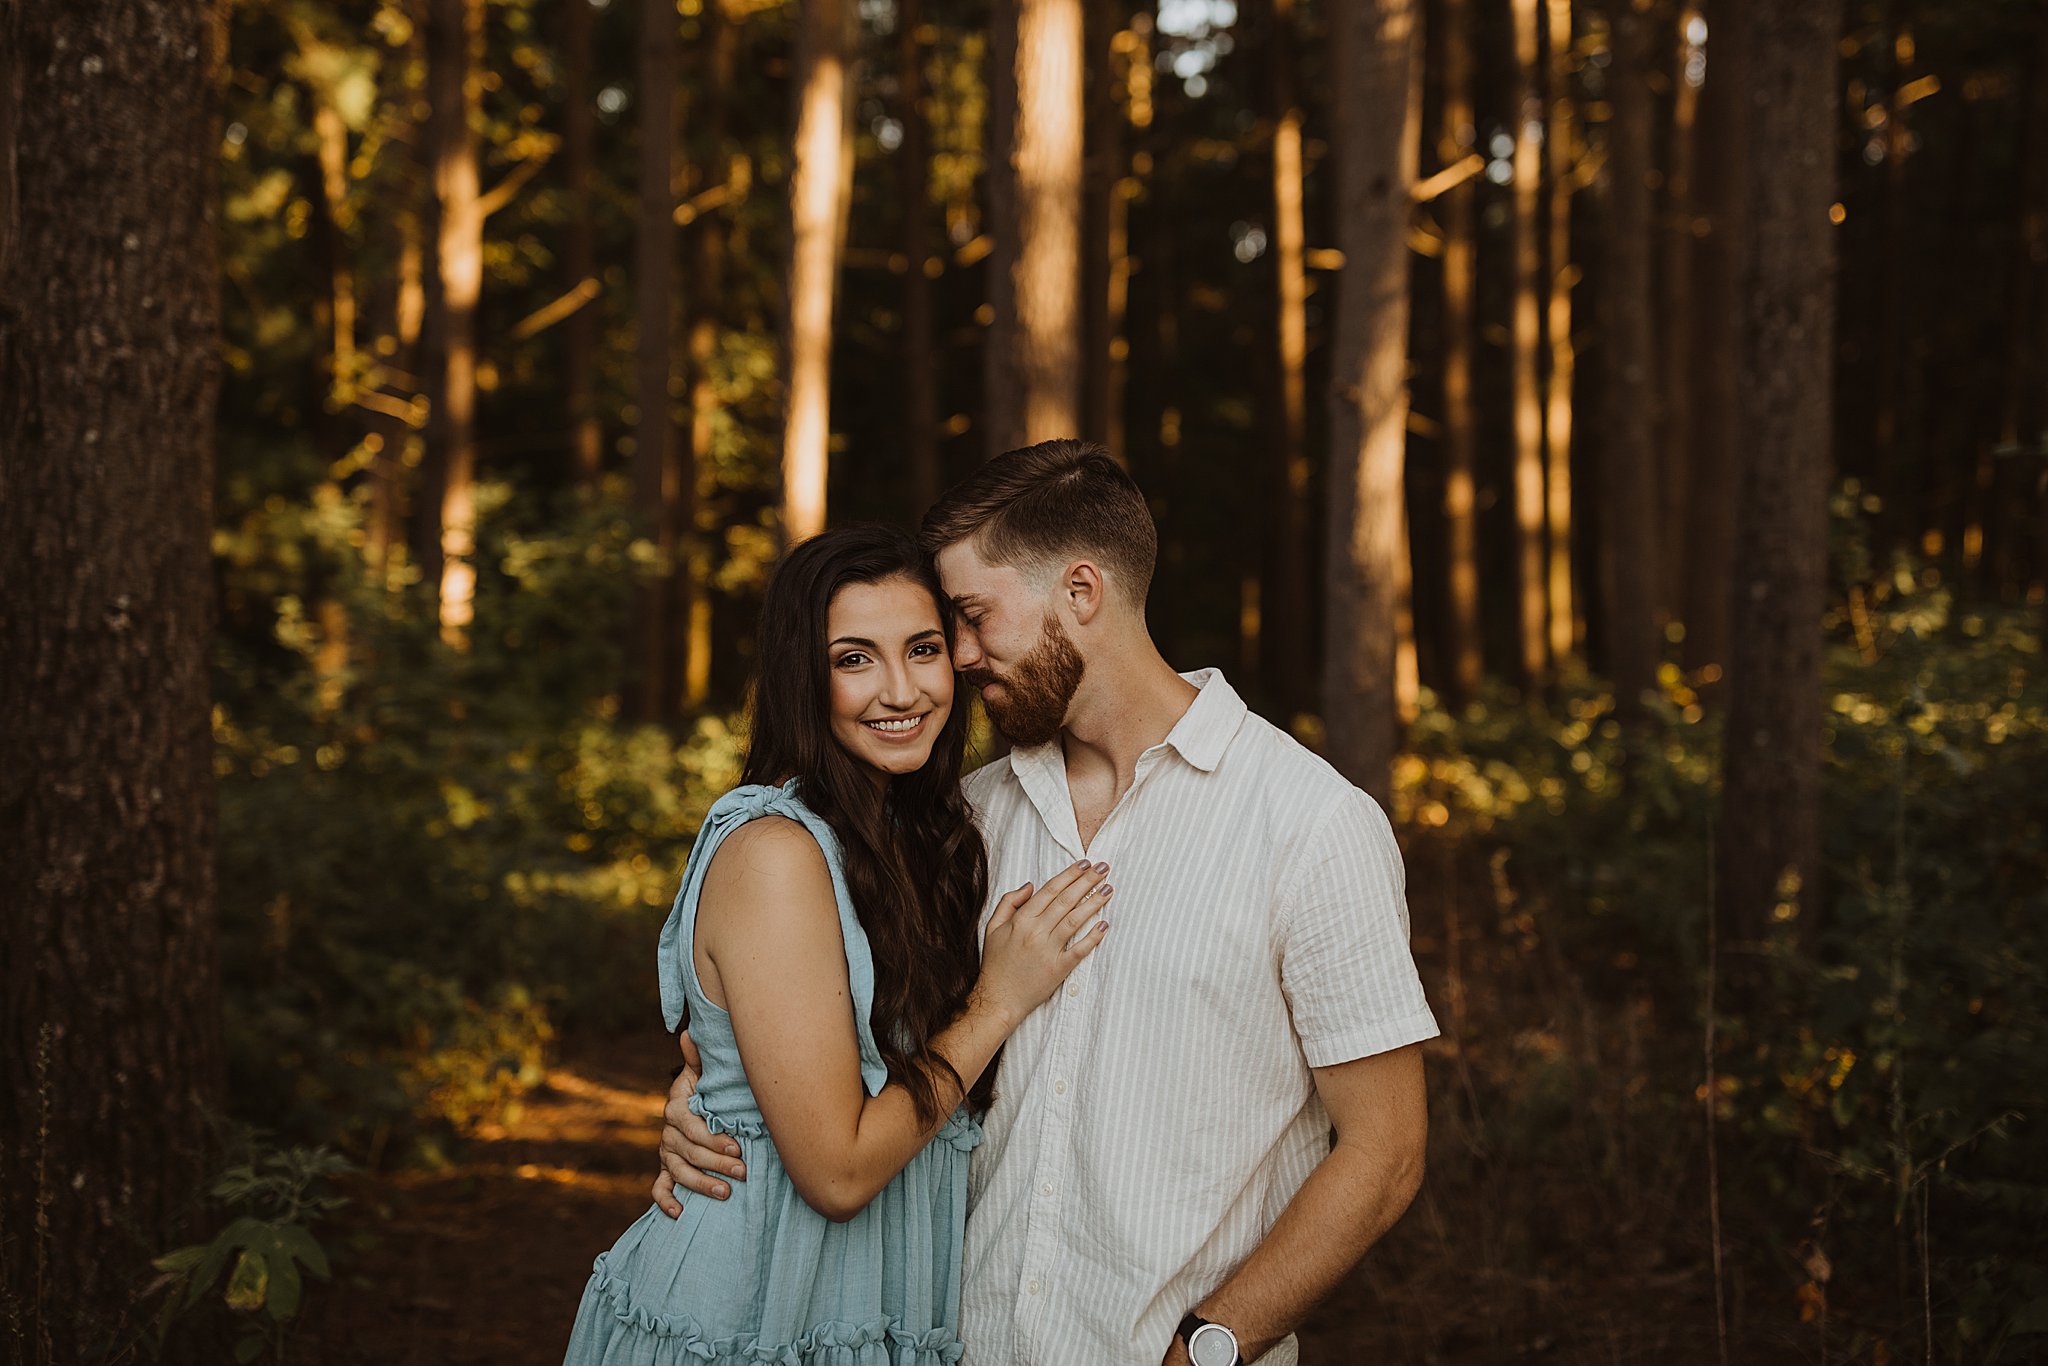 Cute Engagement Poses | Photo Ideas 